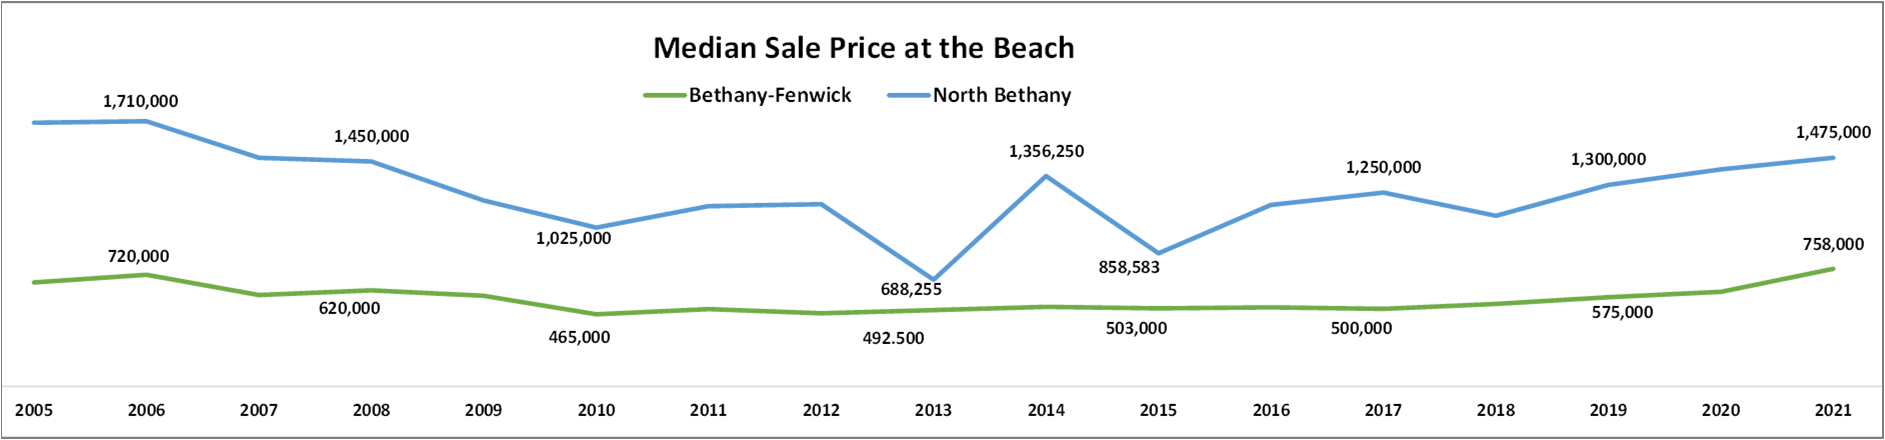 North Bethany median sales price